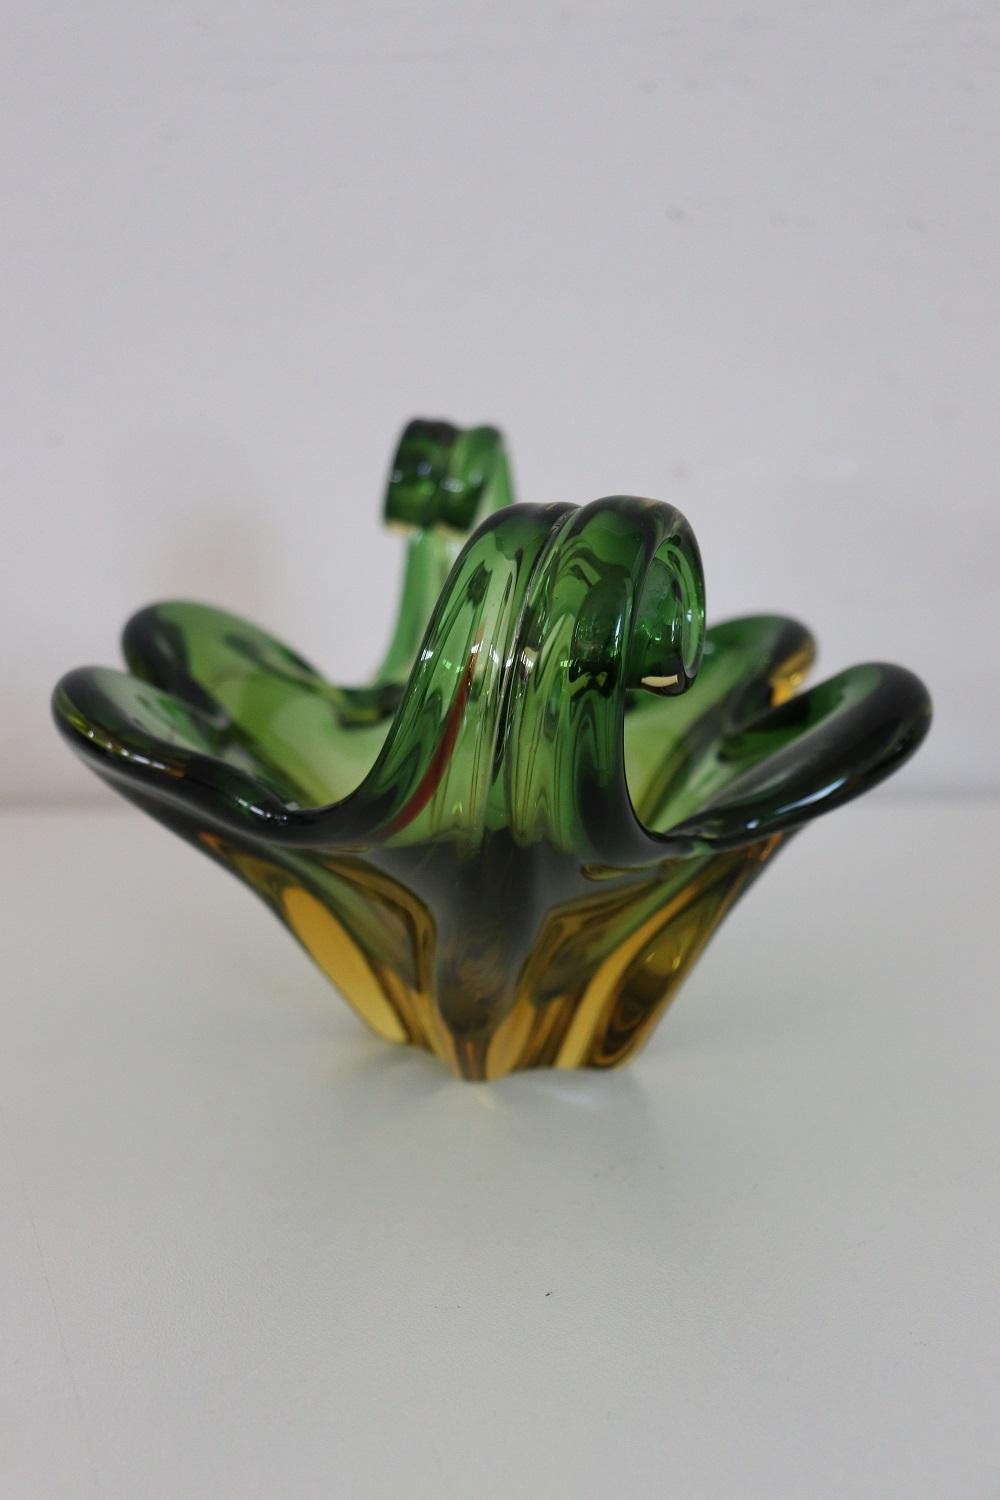 Refined design large vase in submerged Murano glass in shades of yellow and green made by Flavio Poli for Seguso, 1960s. This vase is characterized by a particular design shape. Vase of great refinement you will be truly fascinated when you see it.